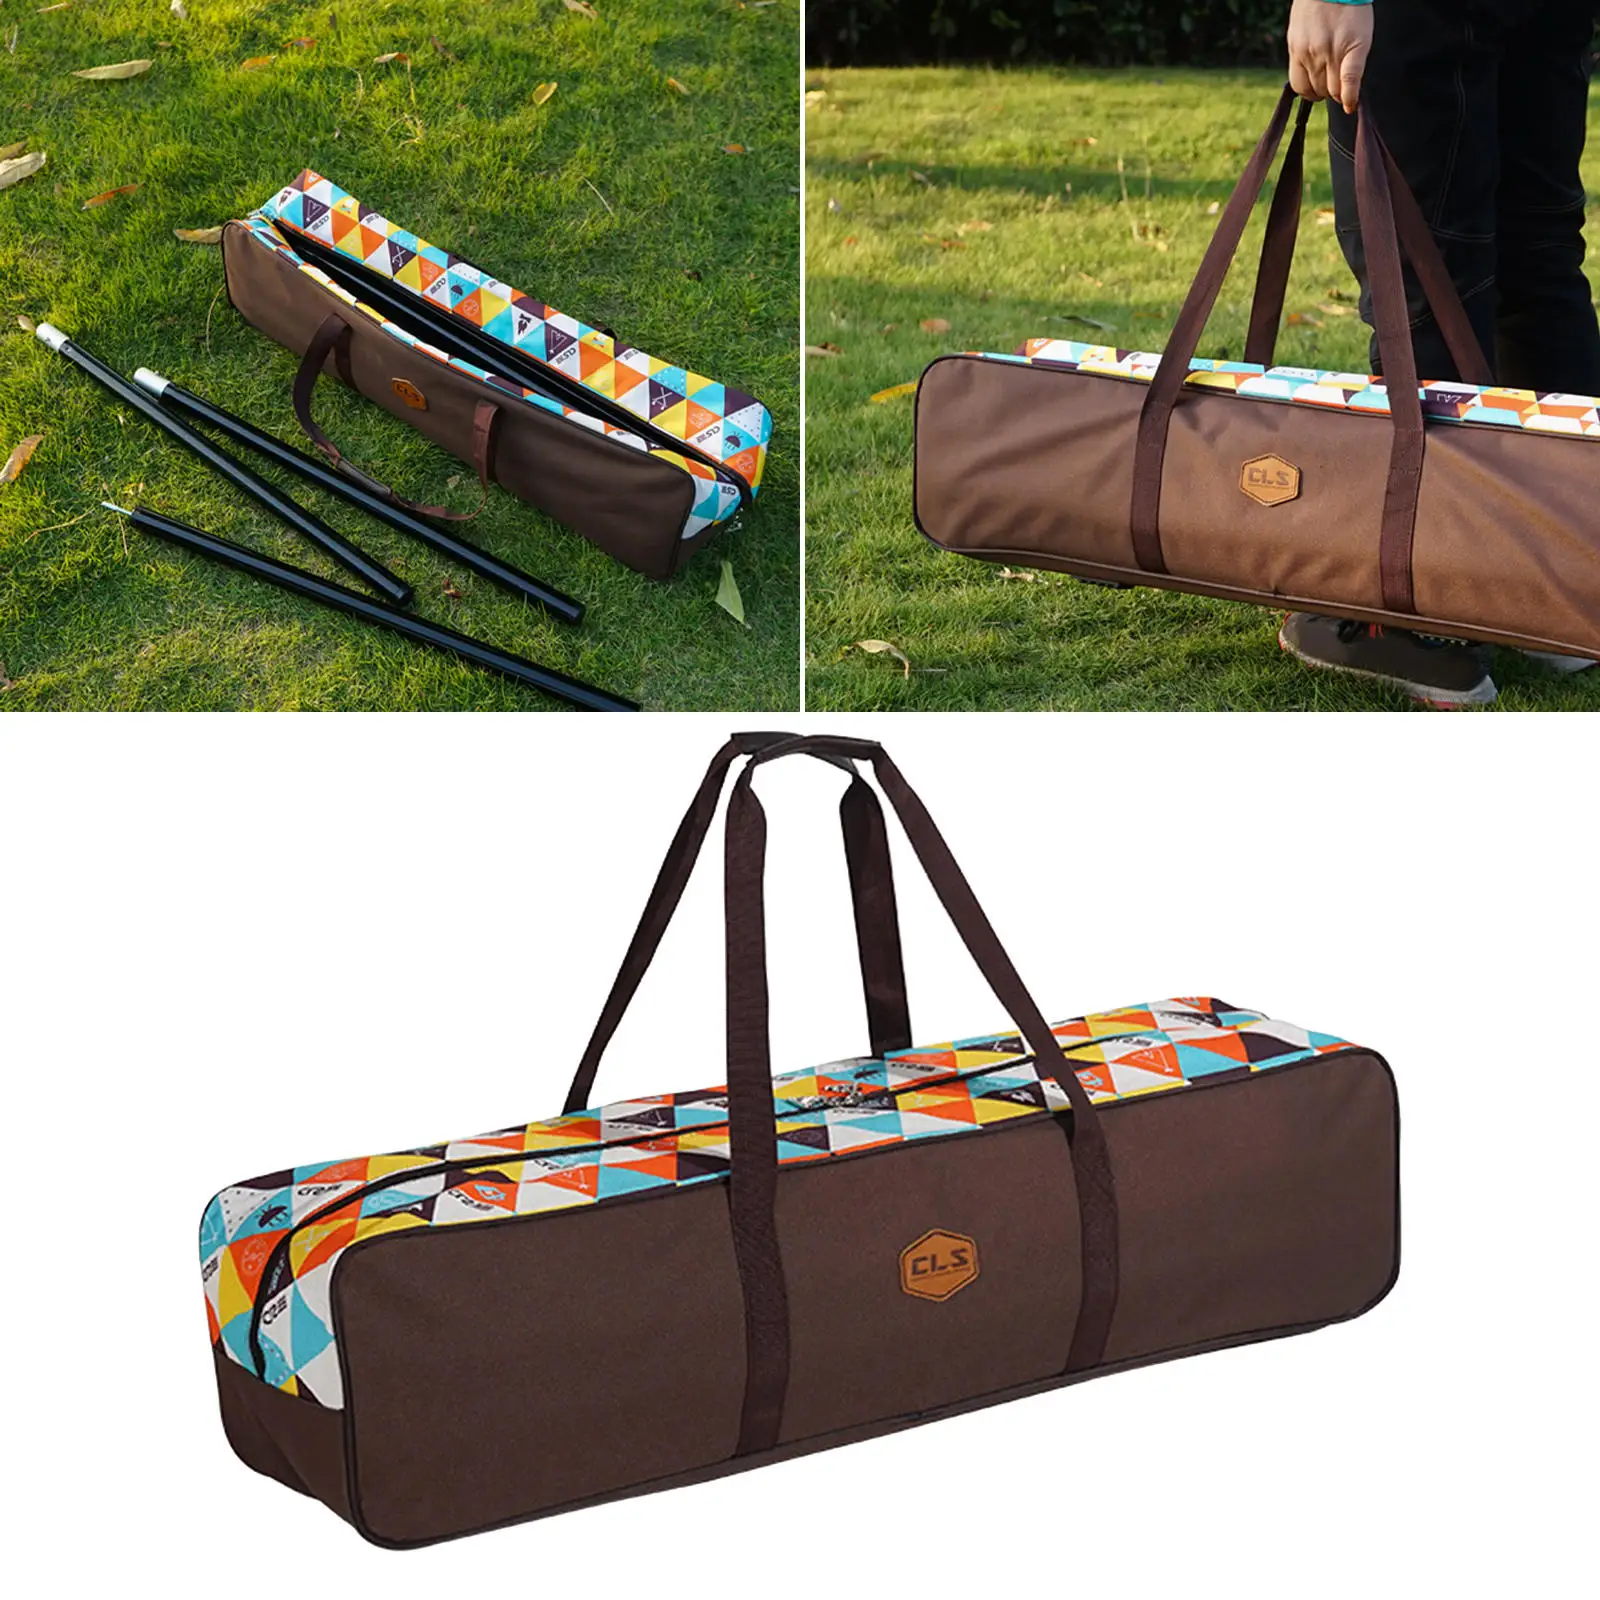 AWNING TENT POLE STORAGE BAG for caravan awning frame cover 